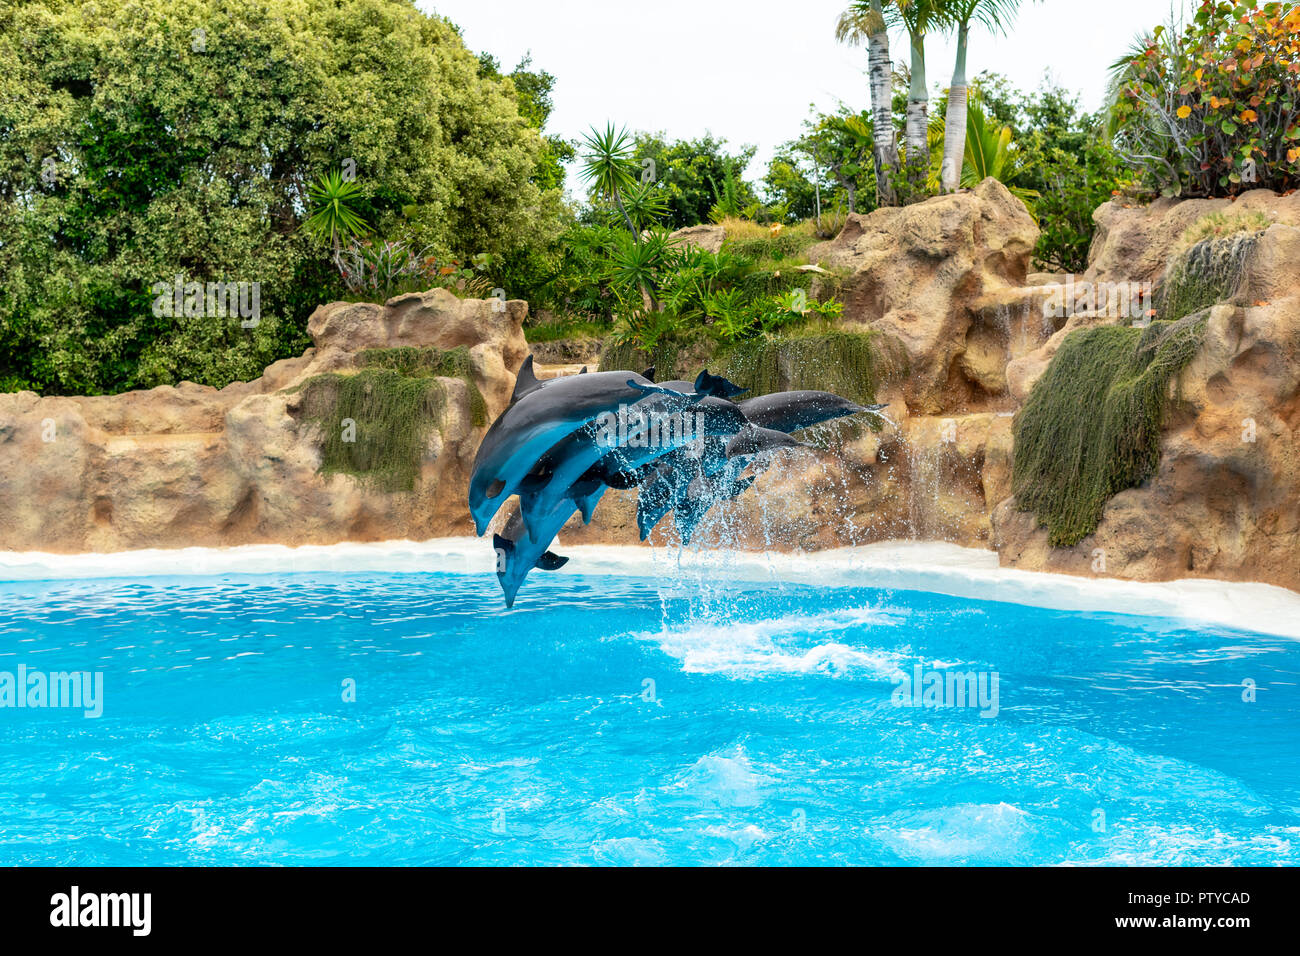 A group of Atlantic bottlenose dolphins (Tursiops truncatus) make a jump out of the water. Stock Photo